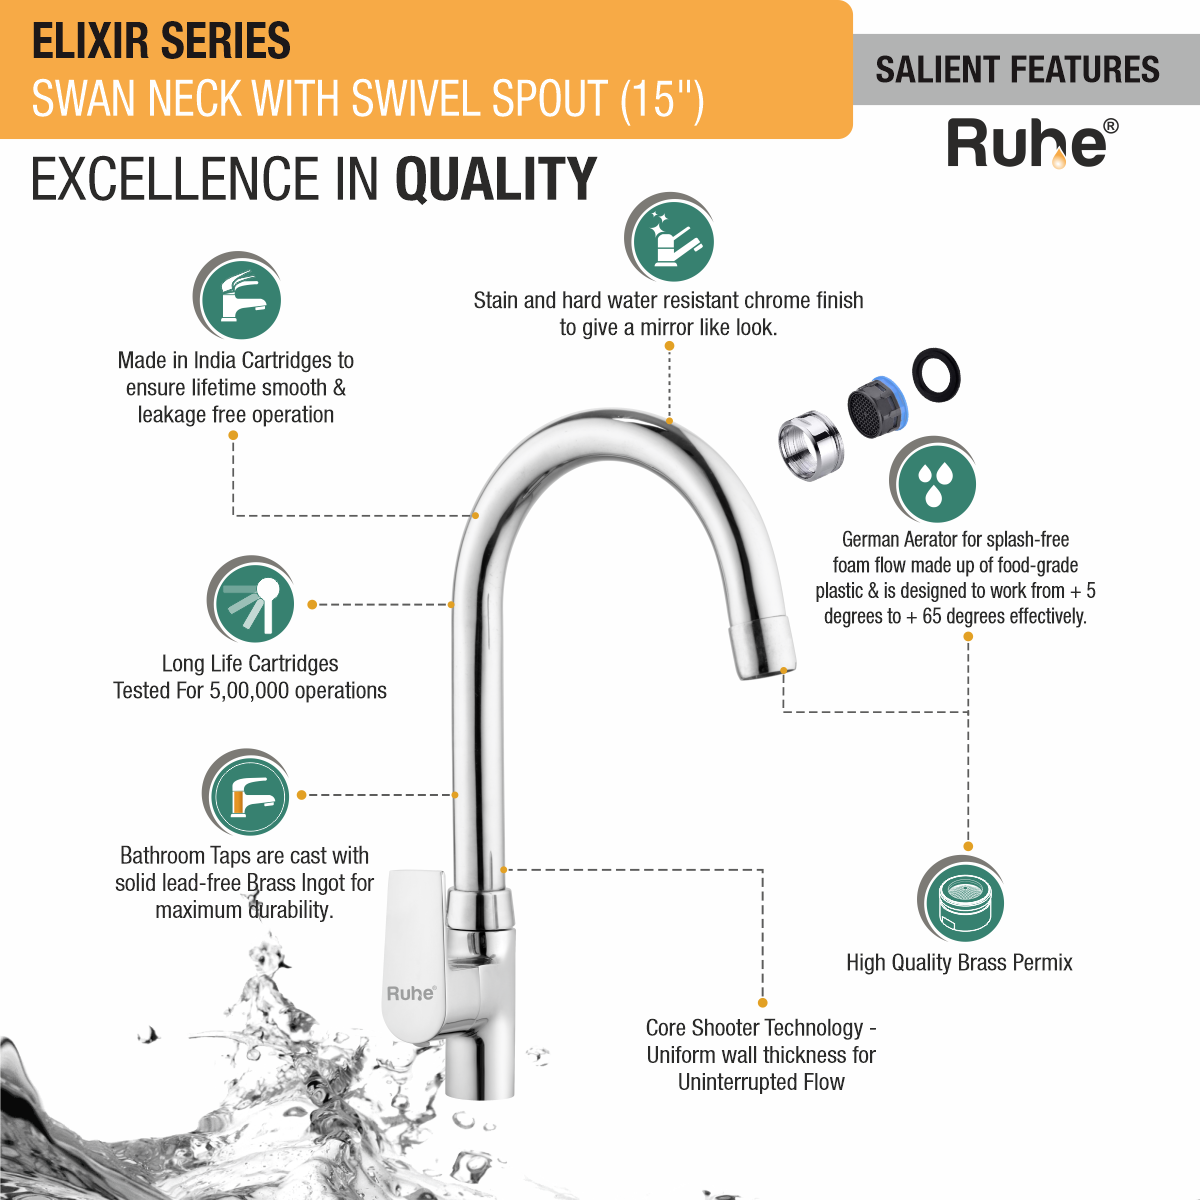 Elixir Swan Neck with Medium (15 inches) Round Swivel Spout Faucet features